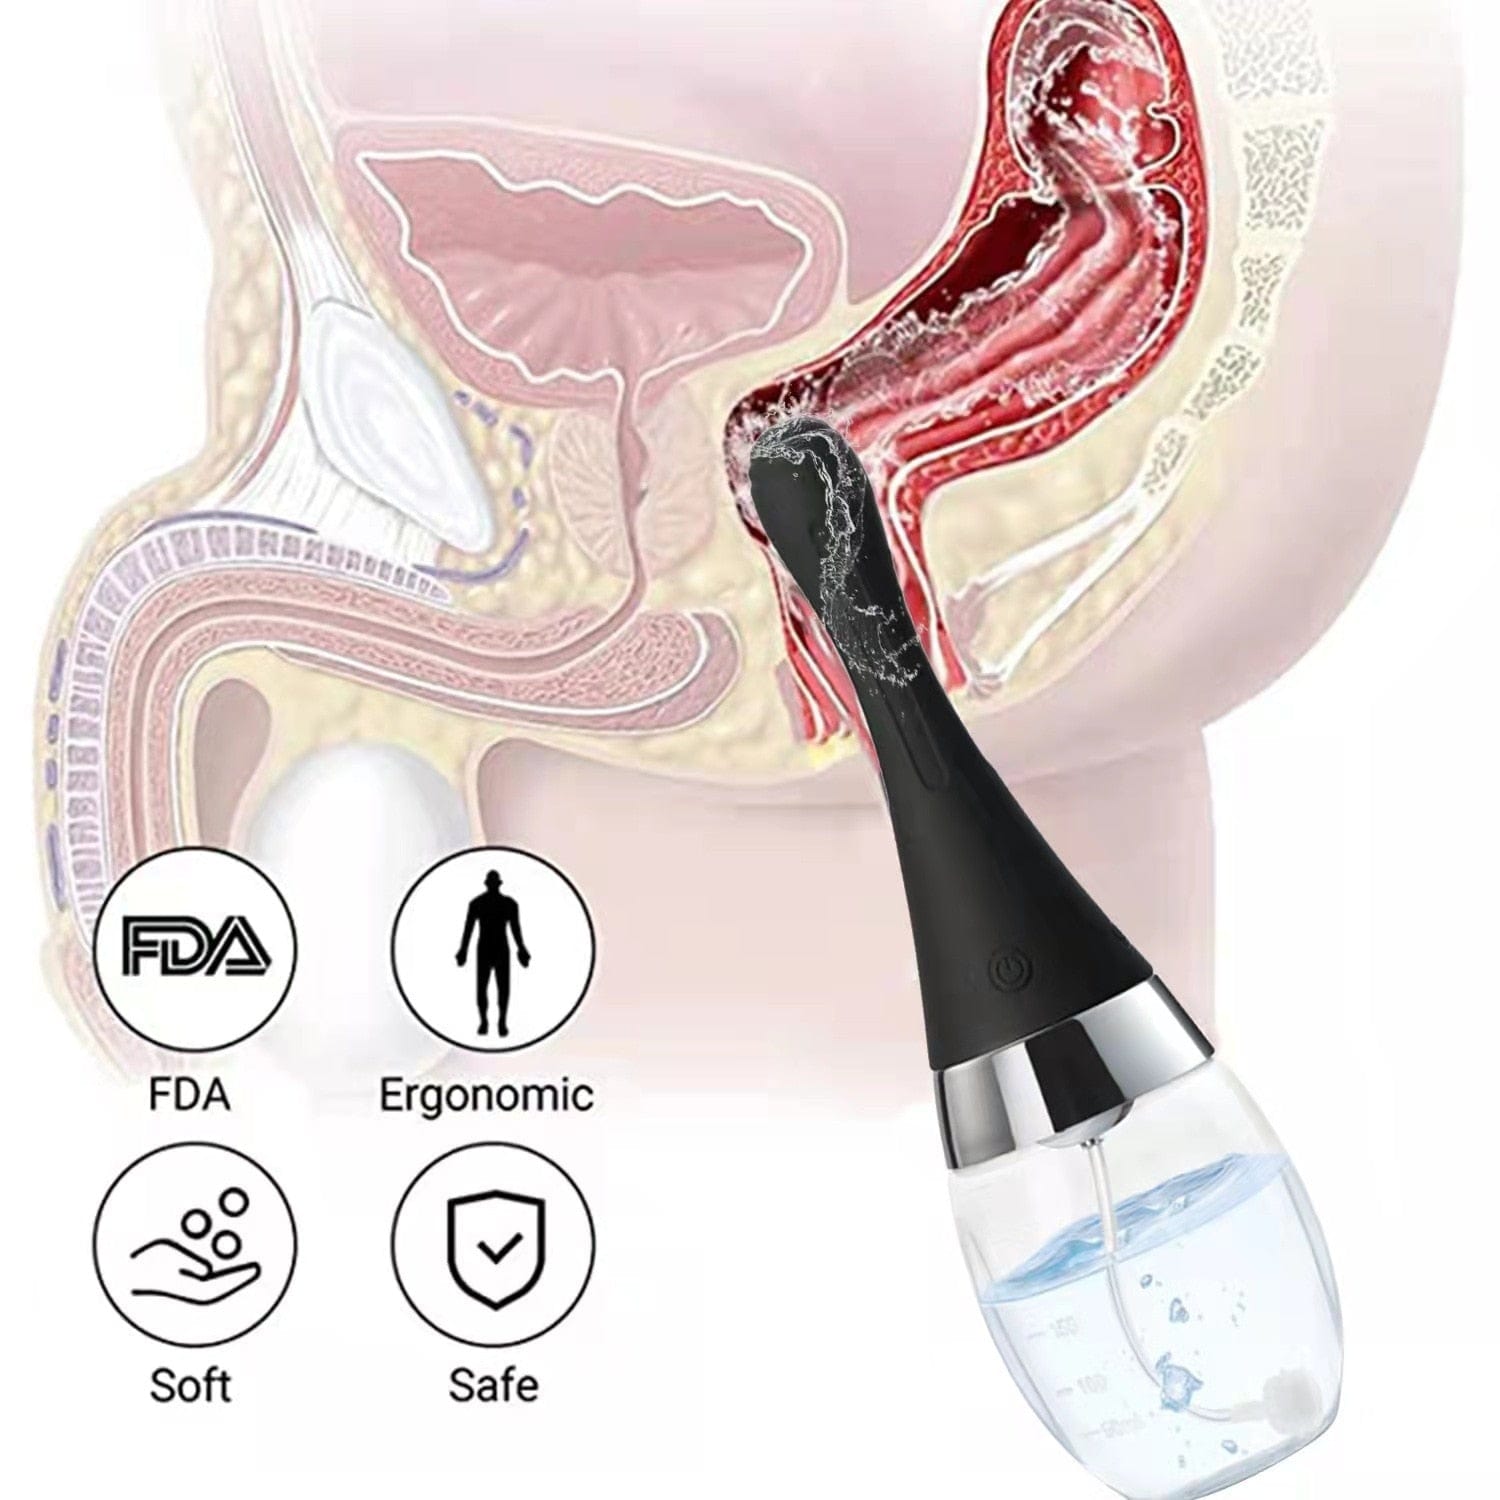 This is an image of Electric Enema device for anal cleansing with mild, moderate, or deep cleaning settings.